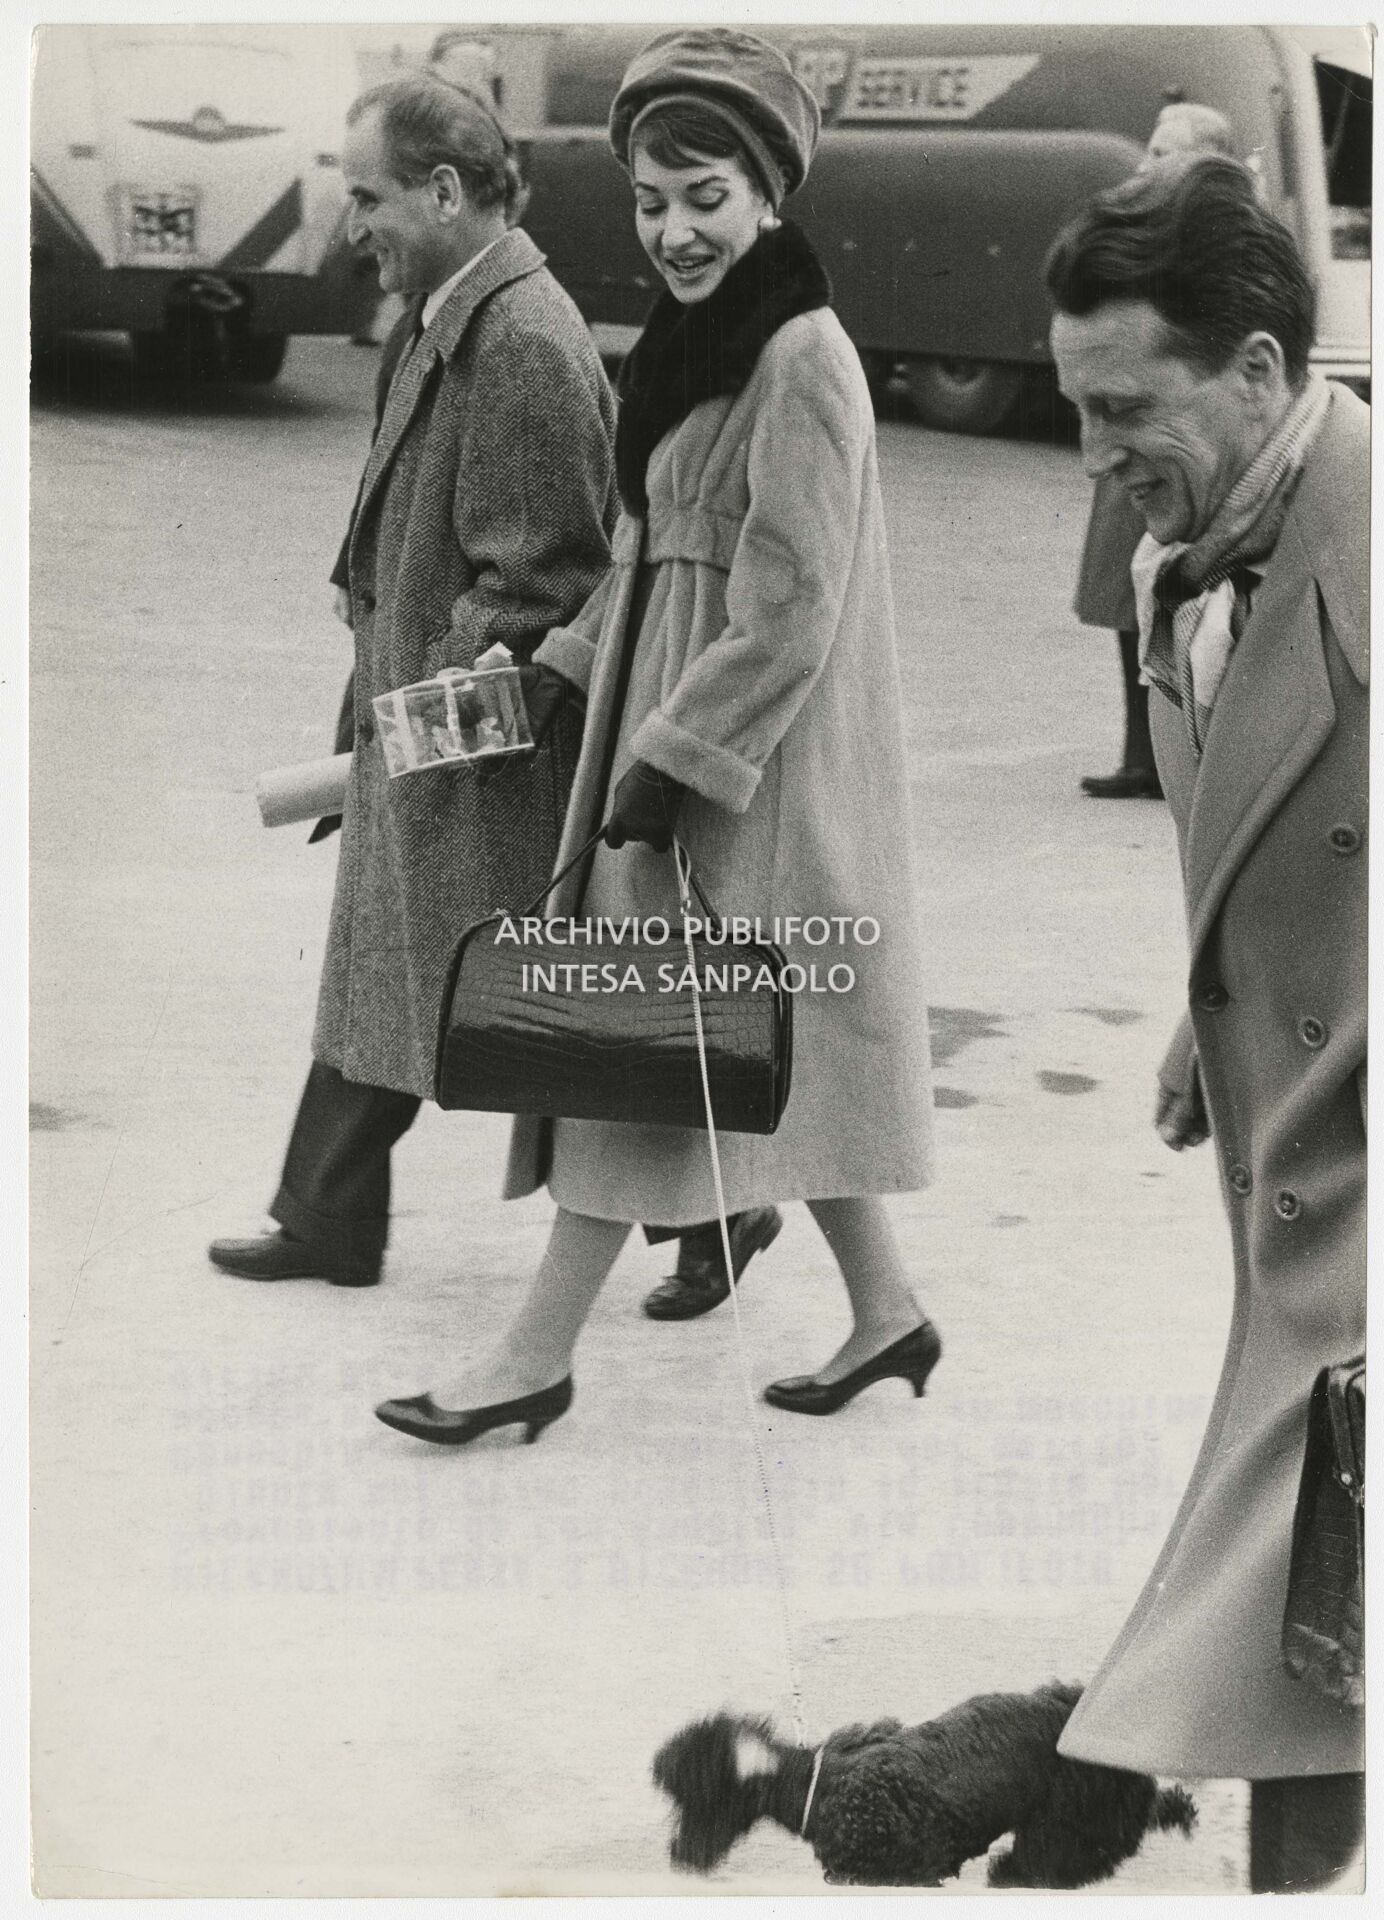 Maria Callas at Malpensa airport, just arrived from Los Angeles, with her poodle